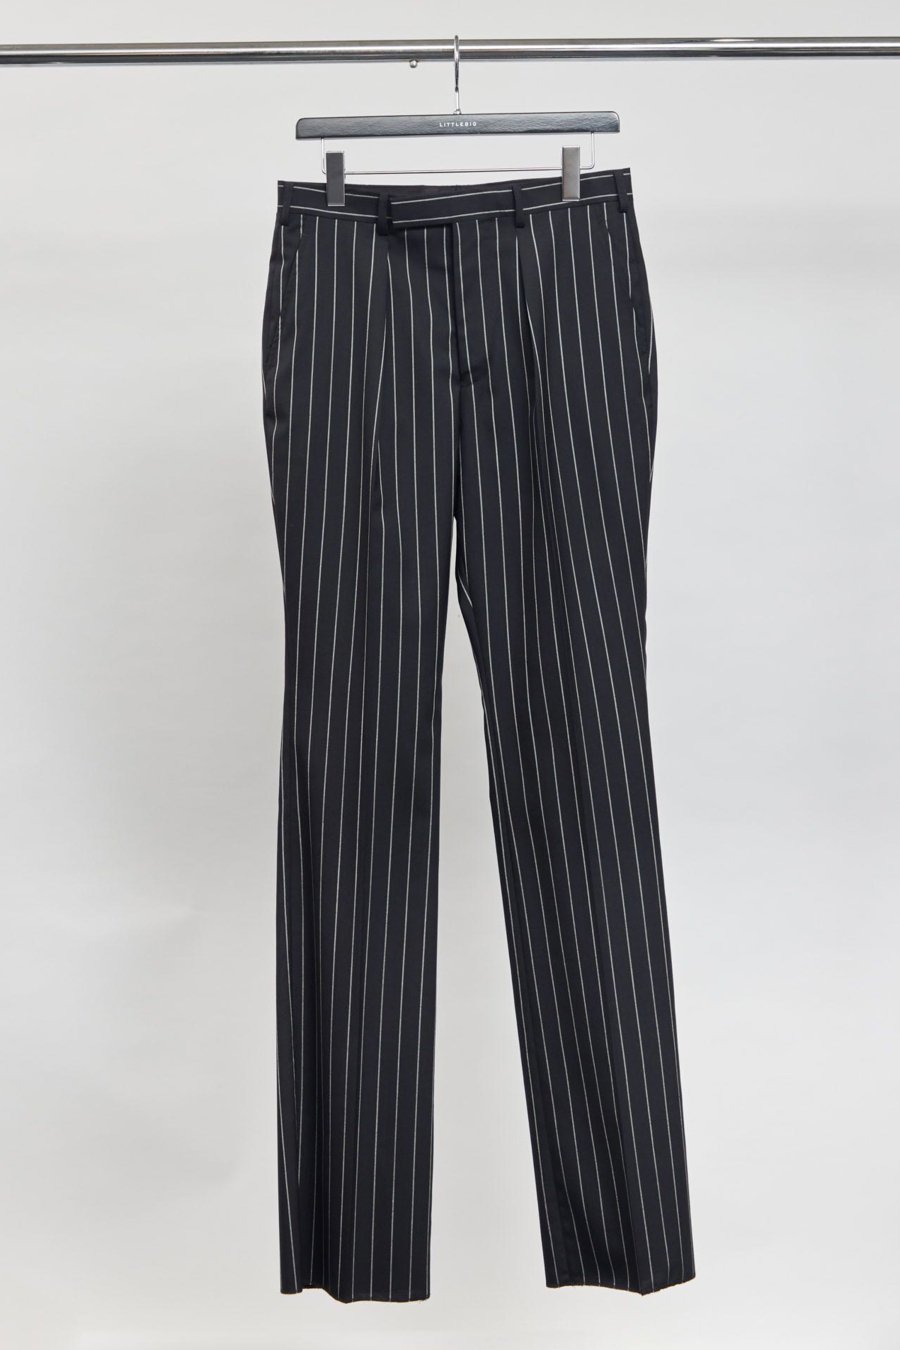 LITTLEBIG  Stripe Flare Trousers<img class='new_mark_img2' src='https://img.shop-pro.jp/img/new/icons15.gif' style='border:none;display:inline;margin:0px;padding:0px;width:auto;' />